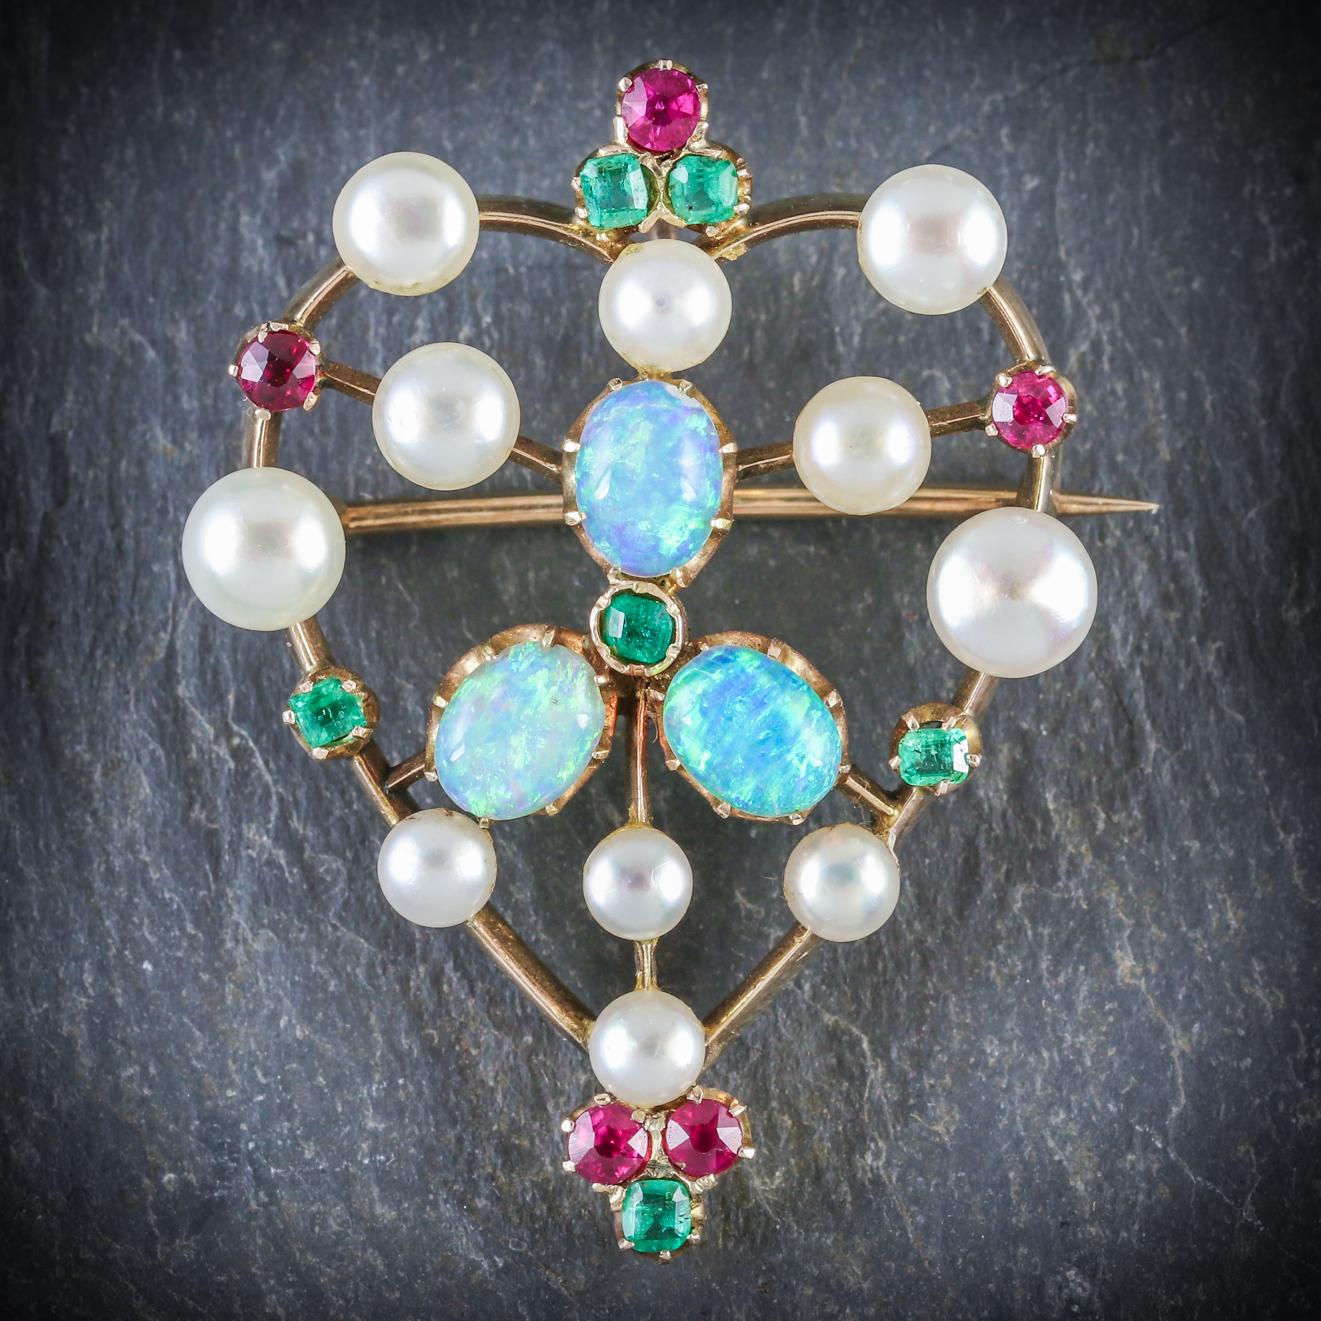 This colourful antique gemstone brooch is Victorian, Circa 1900

The wonderful piece is decorated with 0.45ct of Emerald, 5ct of Pearl, 1.8ct of Opal and 0.4ct of Ruby

All set in 18ct Yellow Gold and fitted with a sturdy pin and catch

Complete